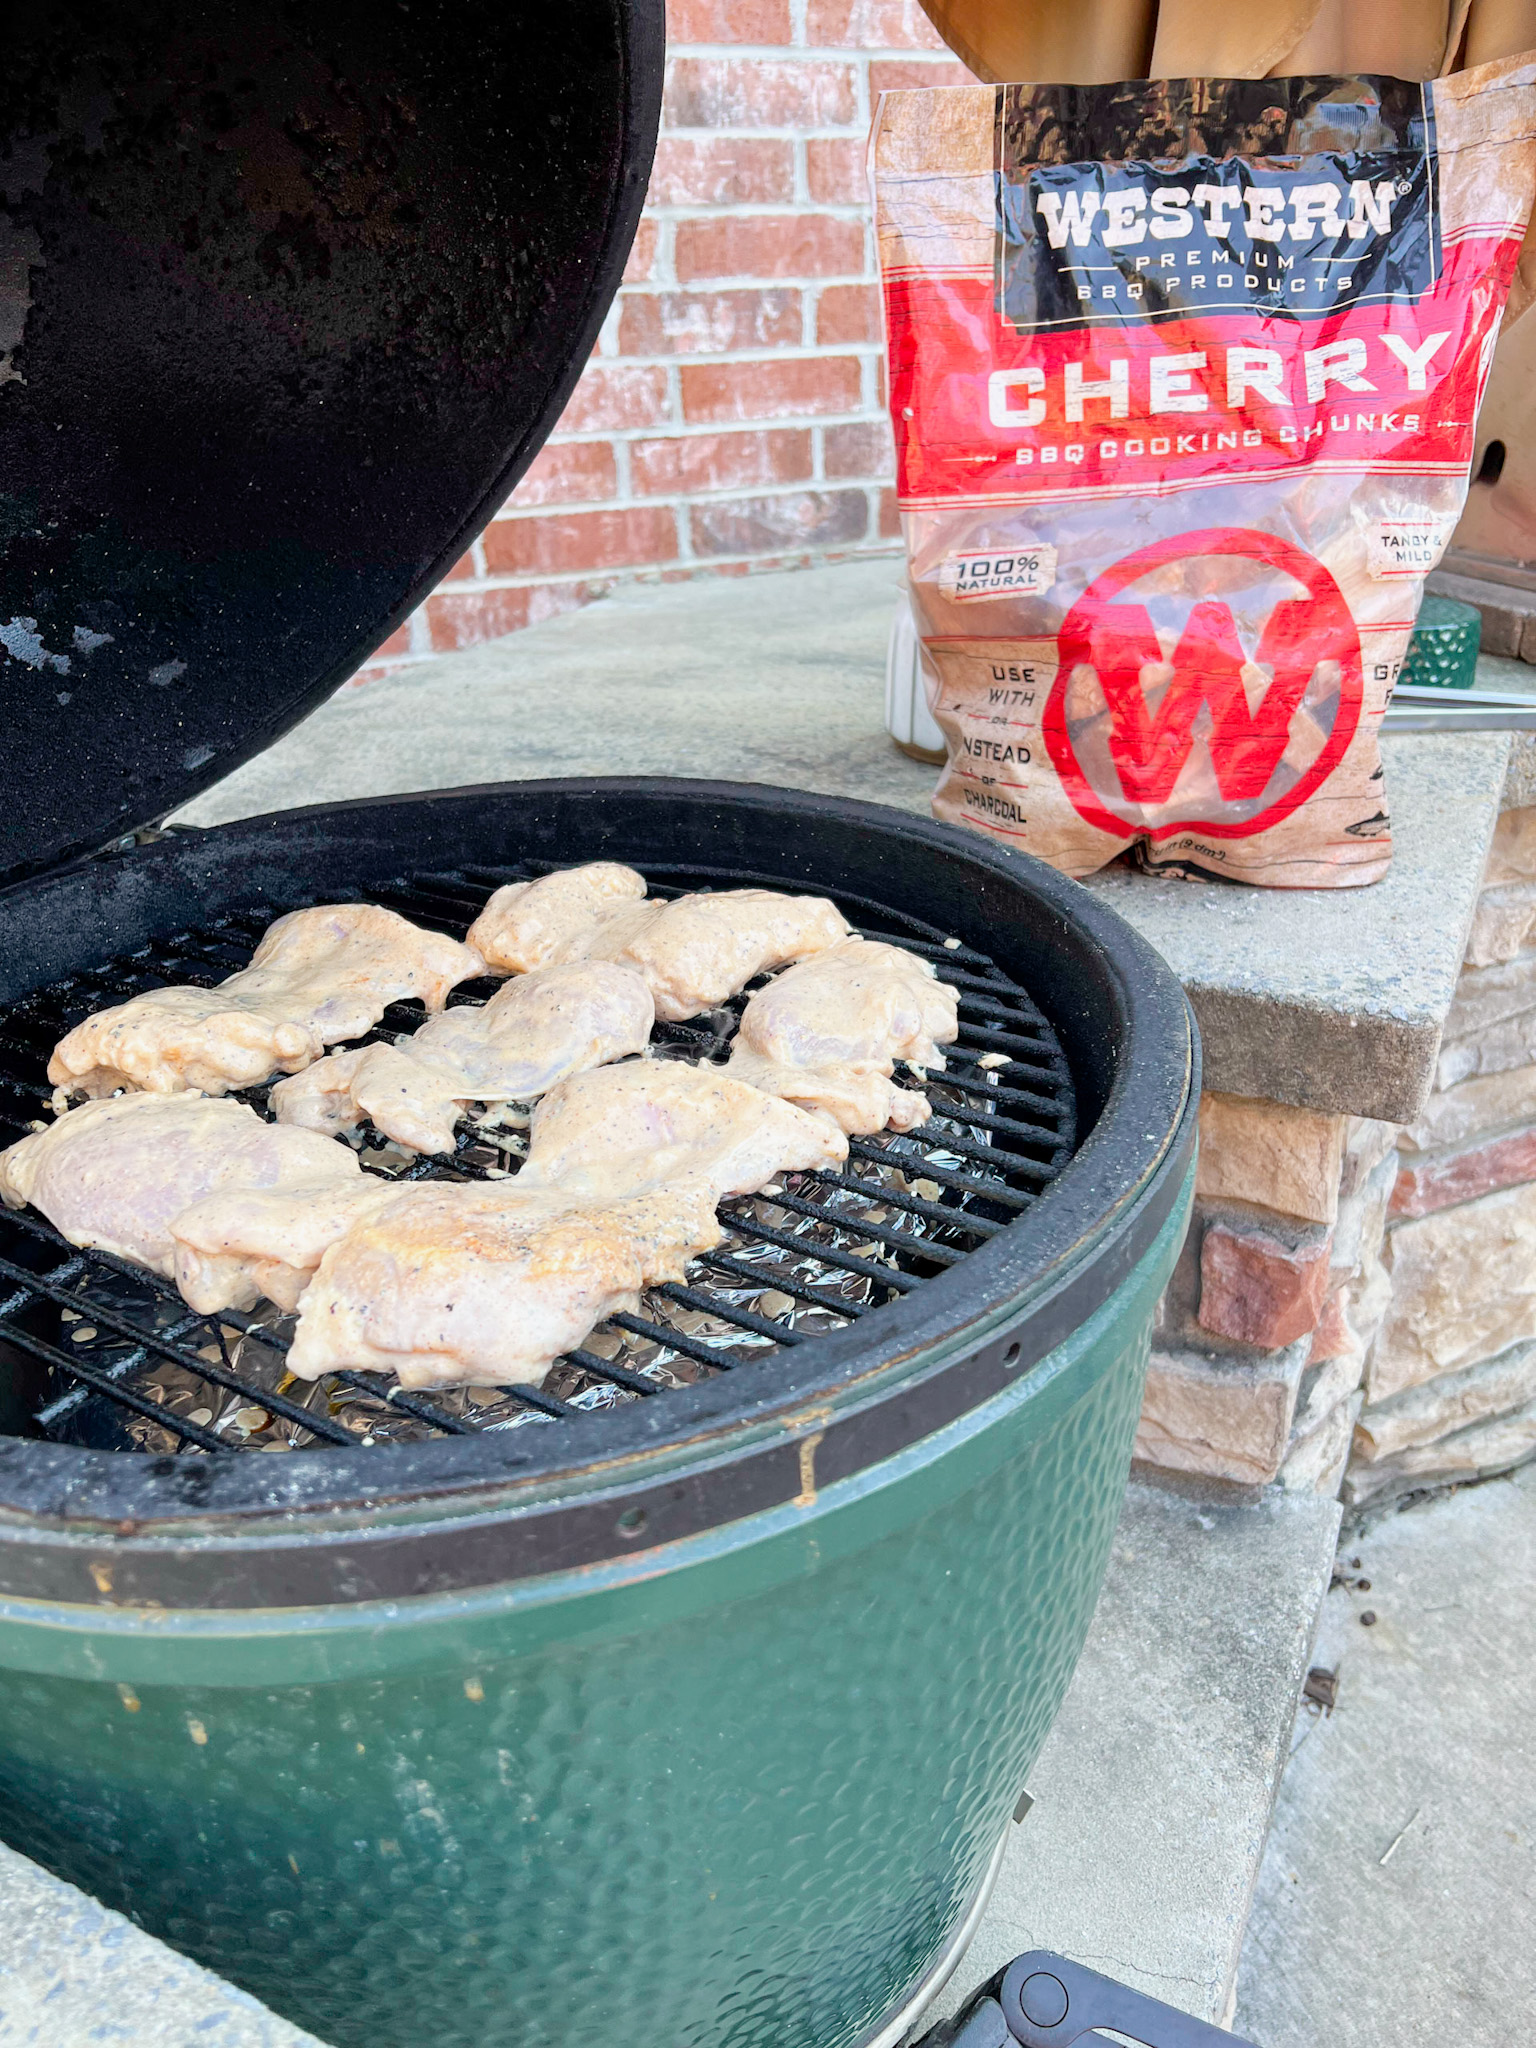 buttermilk marinated chicken thighs on the grill with a bag of western bbq cherry wood chunks